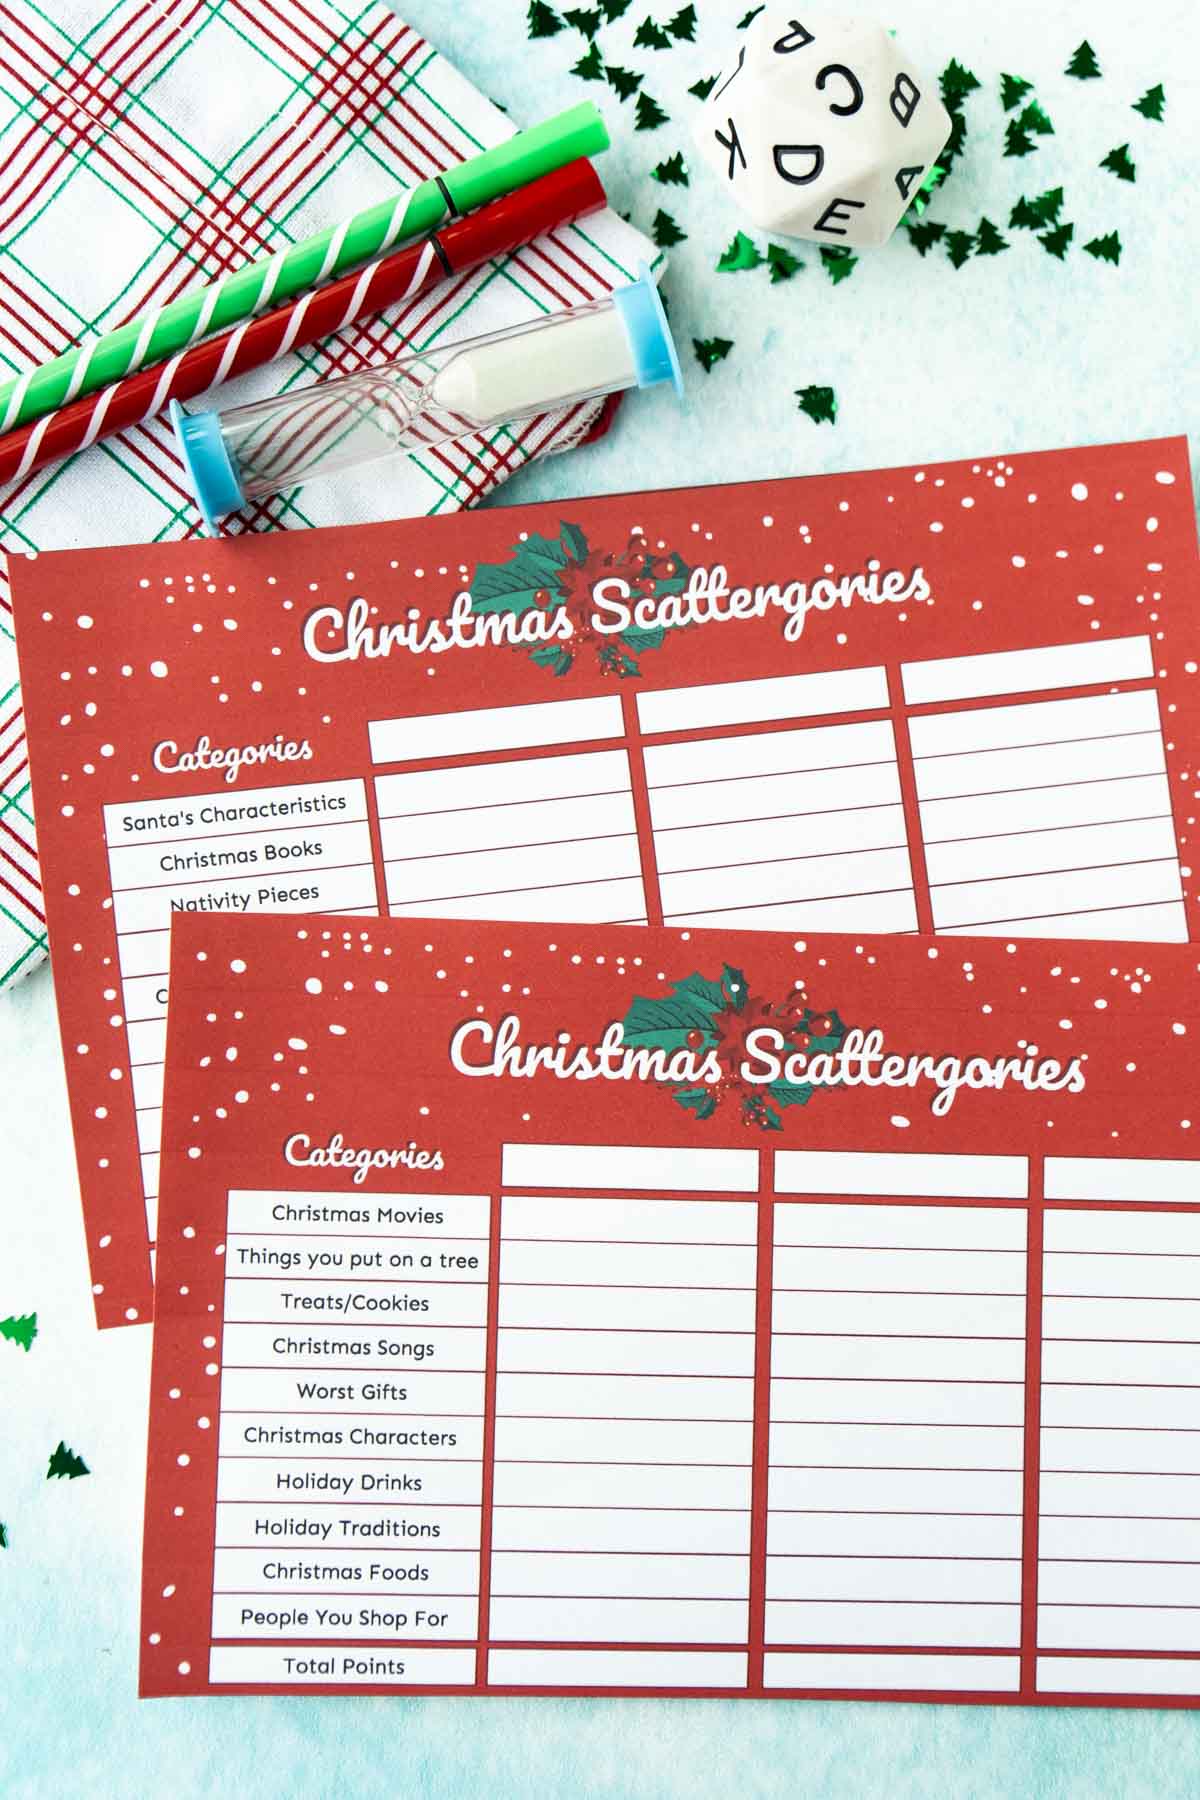 Supplies needed to play Christmas Scattergories